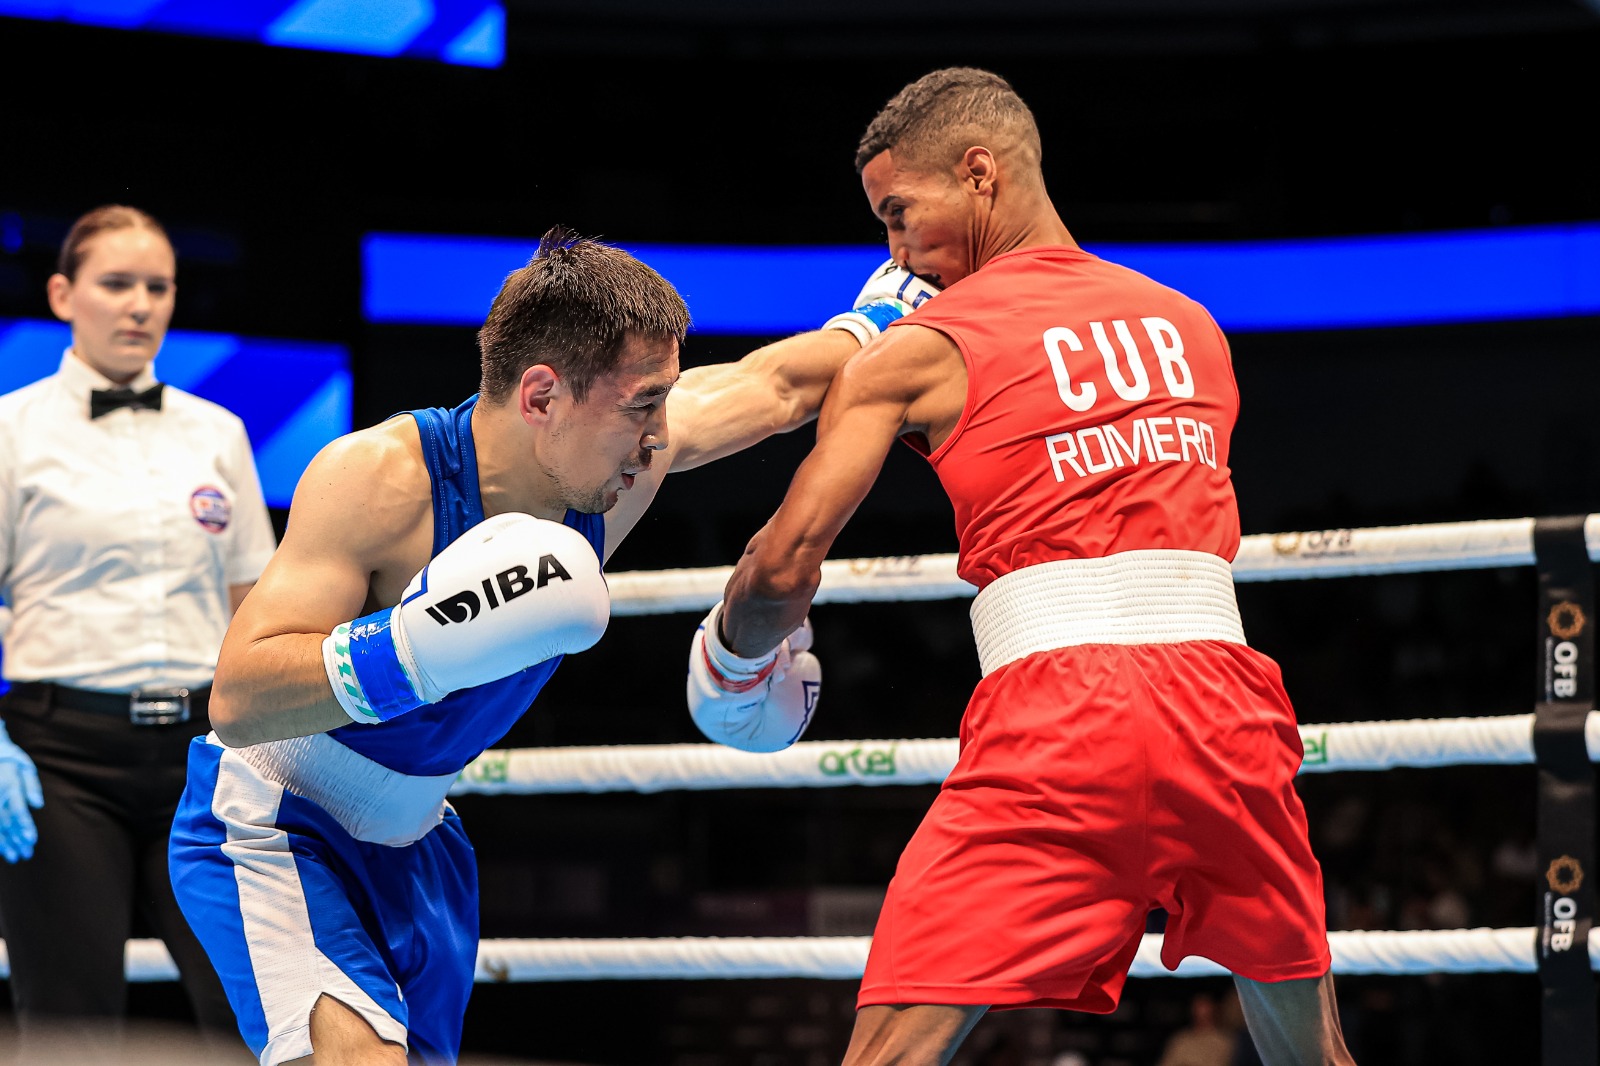 32 nations entered quarterfinals of the IBA Men’s World Boxing